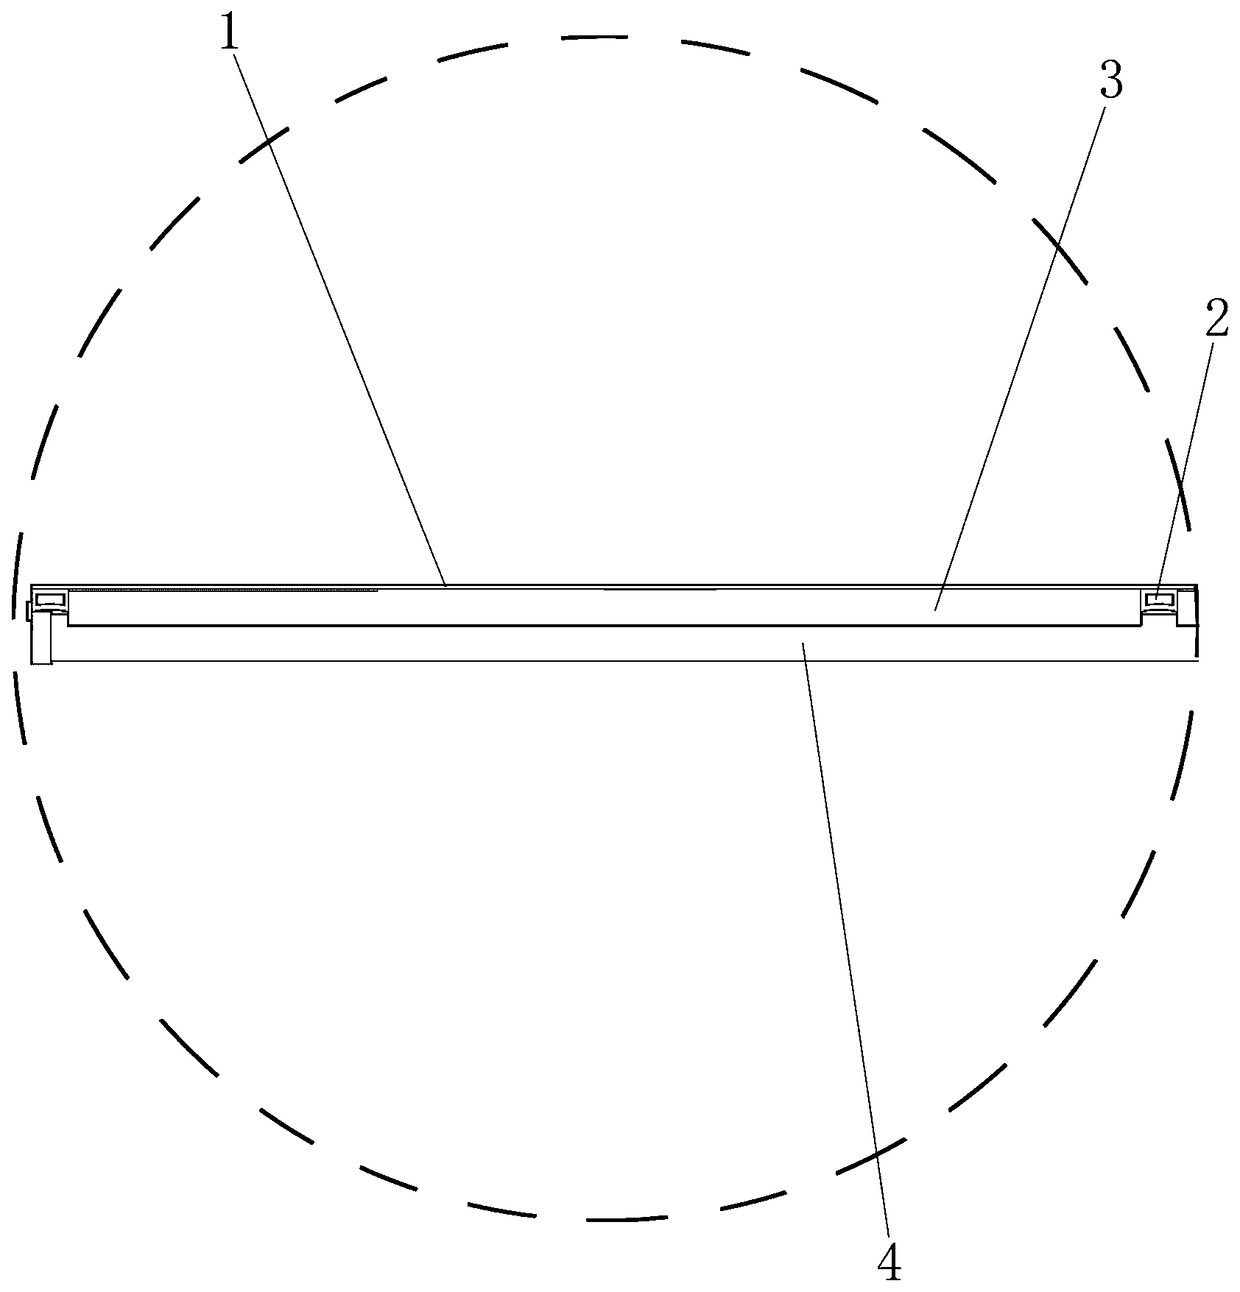 Space-based Radar Foldable and Expandable Antenna Reflector Folding Structure